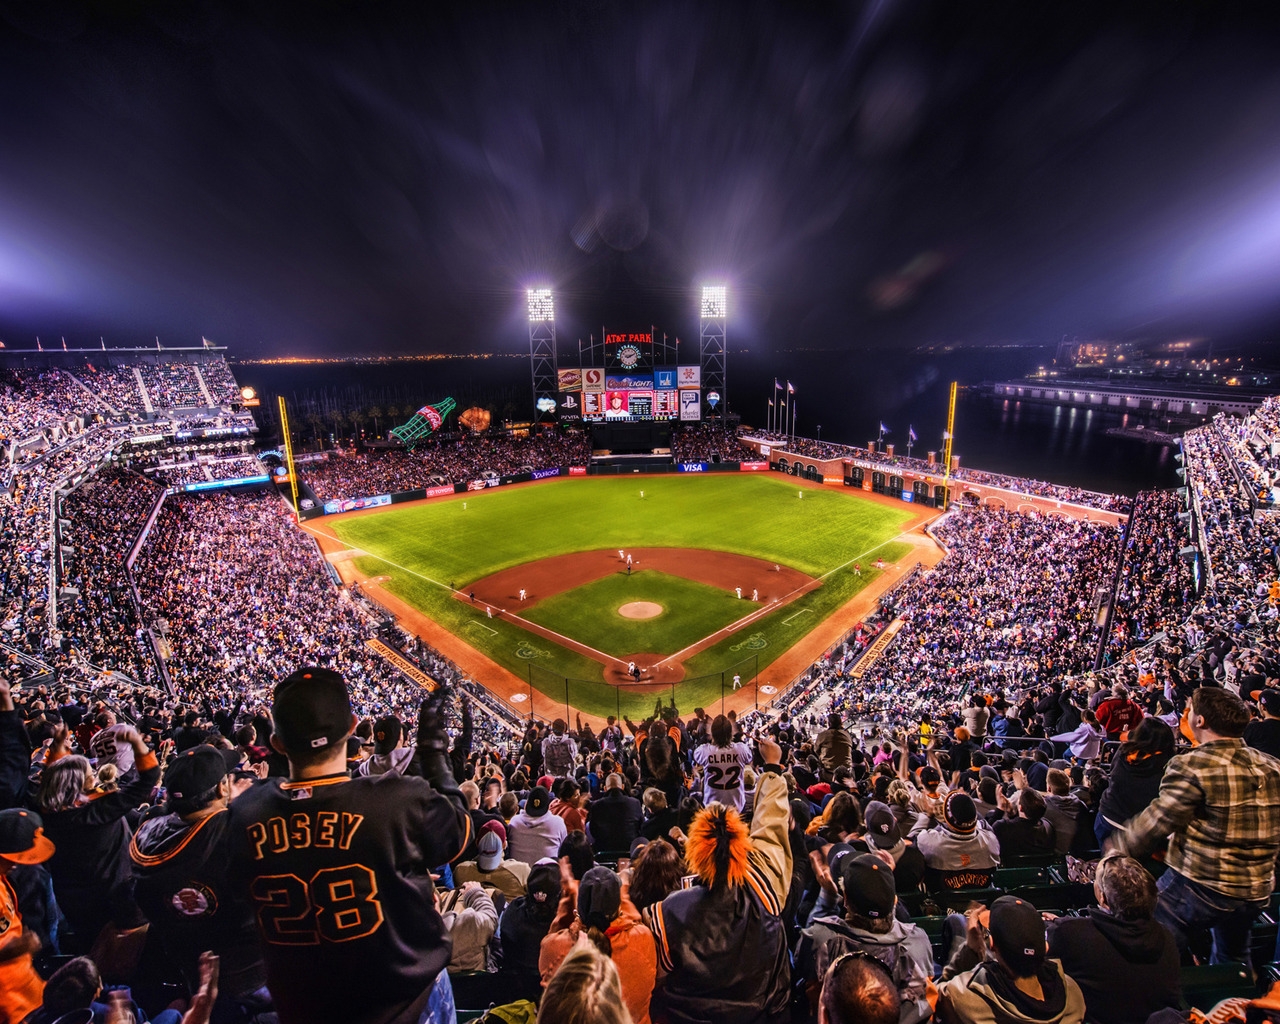 AT&T Park for 1280 x 1024 resolution